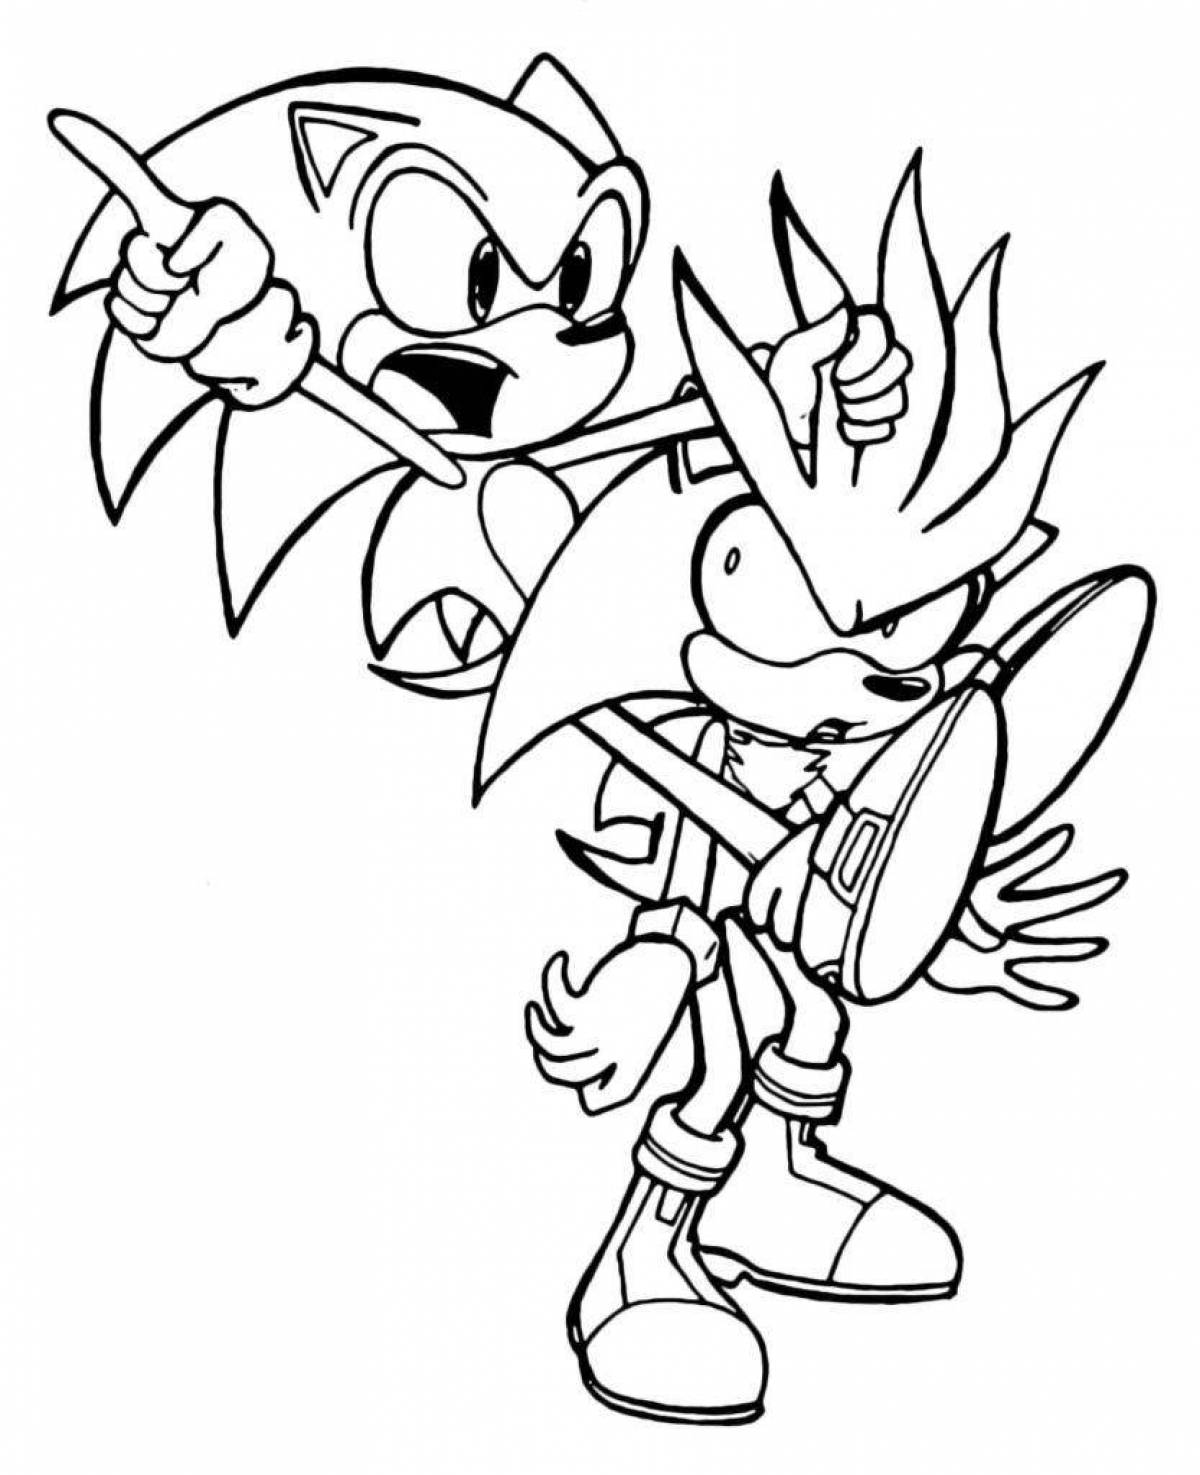 Awesome dark super sonic coloring book